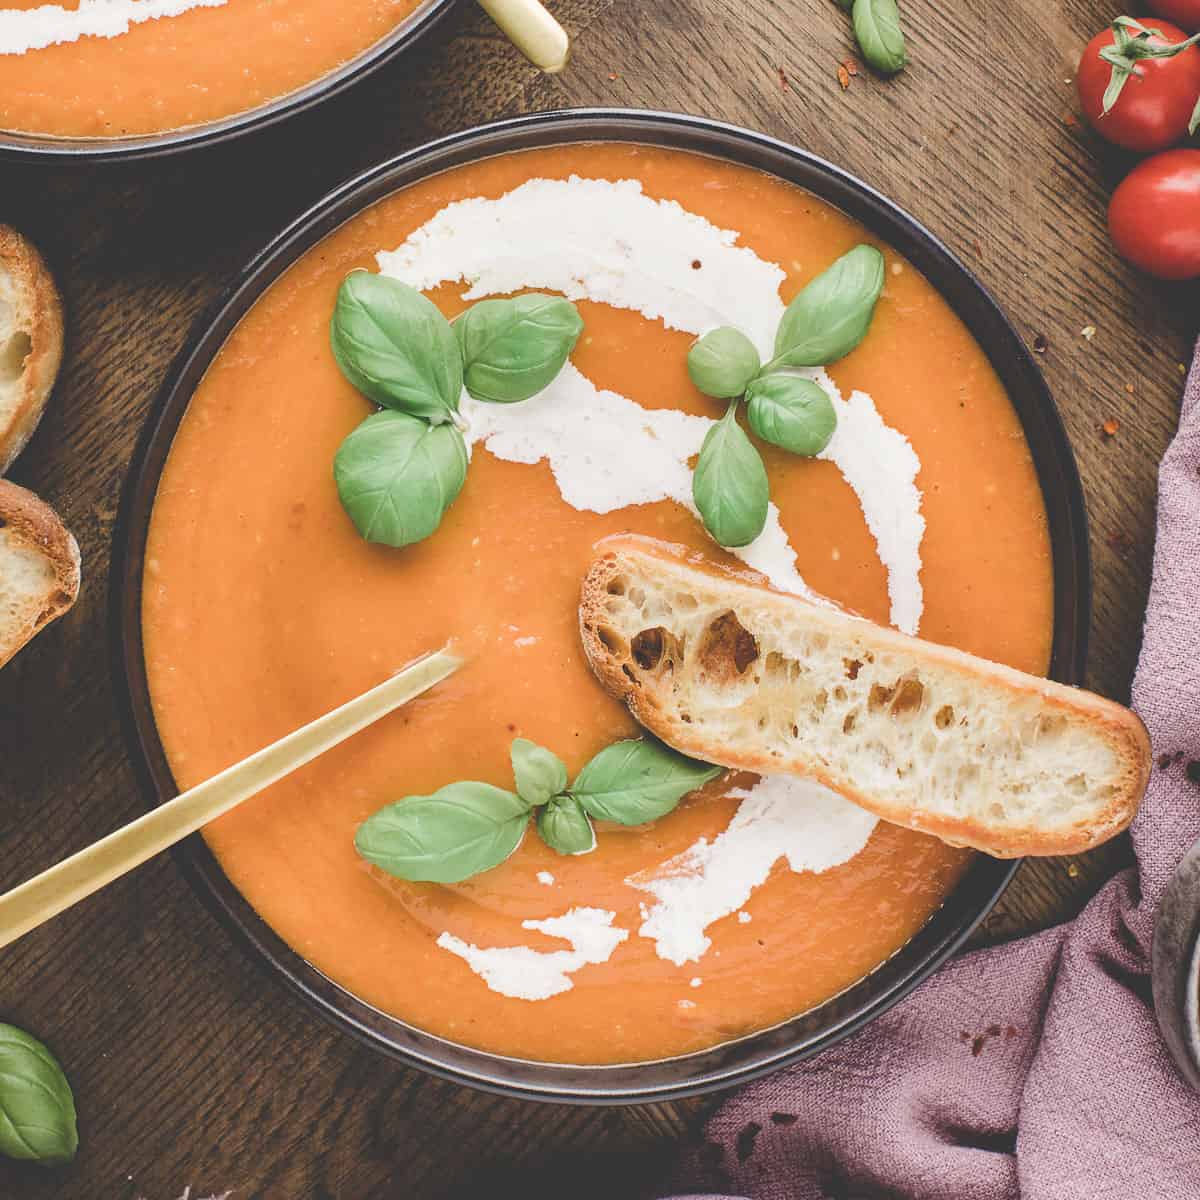 Homemade Tomato Soup recipe - Made with Fresh Tomatoes!